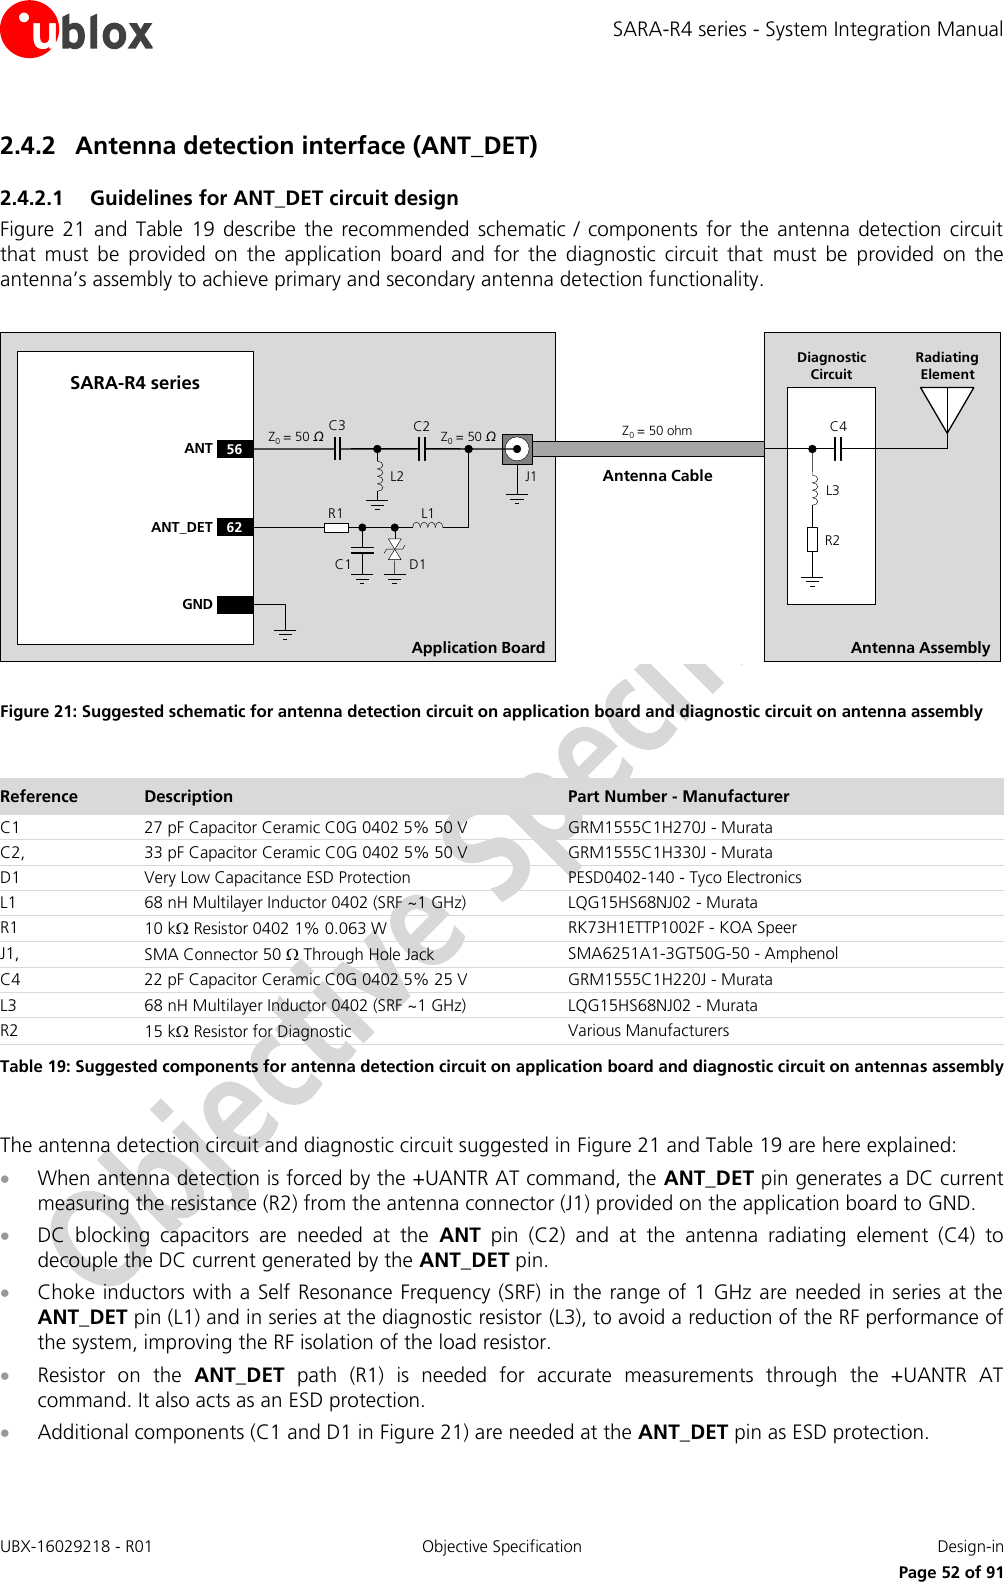 SARA-R4 series - System Integration Manual UBX-16029218 - R01  Objective Specification  Design-in     Page 52 of 91 2.4.2 Antenna detection interface (ANT_DET) 2.4.2.1 Guidelines for ANT_DET circuit design Figure  21 and  Table  19  describe  the recommended  schematic  / components for  the antenna  detection  circuit that  must  be  provided  on  the  application  board  and  for  the  diagnostic  circuit  that  must  be  provided  on  the antenna’s assembly to achieve primary and secondary antenna detection functionality.  Application BoardAntenna CableSARA-R4 series56ANT62ANT_DETR1C1 D1L1C2J1Z0= 50 ΩZ0= 50 ΩZ0= 50 ohmAntenna AssemblyR2C4L3Radiating ElementDiagnostic CircuitGNDL2C3 Figure 21: Suggested schematic for antenna detection circuit on application board and diagnostic circuit on antenna assembly  Reference Description Part Number - Manufacturer C1 27 pF Capacitor Ceramic C0G 0402 5% 50 V GRM1555C1H270J - Murata C2, 33 pF Capacitor Ceramic C0G 0402 5% 50 V GRM1555C1H330J - Murata D1 Very Low Capacitance ESD Protection PESD0402-140 - Tyco Electronics L1 68 nH Multilayer Inductor 0402 (SRF ~1 GHz) LQG15HS68NJ02 - Murata R1 10 k Resistor 0402 1% 0.063 W RK73H1ETTP1002F - KOA Speer J1, SMA Connector 50  Through Hole Jack SMA6251A1-3GT50G-50 - Amphenol C4 22 pF Capacitor Ceramic C0G 0402 5% 25 V  GRM1555C1H220J - Murata L3 68 nH Multilayer Inductor 0402 (SRF ~1 GHz) LQG15HS68NJ02 - Murata R2 15 k Resistor for Diagnostic Various Manufacturers Table 19: Suggested components for antenna detection circuit on application board and diagnostic circuit on antennas assembly  The antenna detection circuit and diagnostic circuit suggested in Figure 21 and Table 19 are here explained:  When antenna detection is forced by the +UANTR AT command, the ANT_DET pin generates a DC current measuring the resistance (R2) from the antenna connector (J1) provided on the application board to GND.  DC  blocking  capacitors  are  needed  at  the  ANT  pin  (C2)  and  at  the  antenna  radiating  element  (C4)  to decouple the DC current generated by the ANT_DET pin.  Choke inductors with a Self Resonance Frequency (SRF) in the range of 1  GHz are needed in series at the ANT_DET pin (L1) and in series at the diagnostic resistor (L3), to avoid a reduction of the RF performance of the system, improving the RF isolation of the load resistor.   Resistor  on  the  ANT_DET  path  (R1)  is  needed  for  accurate  measurements  through  the  +UANTR  AT command. It also acts as an ESD protection.   Additional components (C1 and D1 in Figure 21) are needed at the ANT_DET pin as ESD protection. 